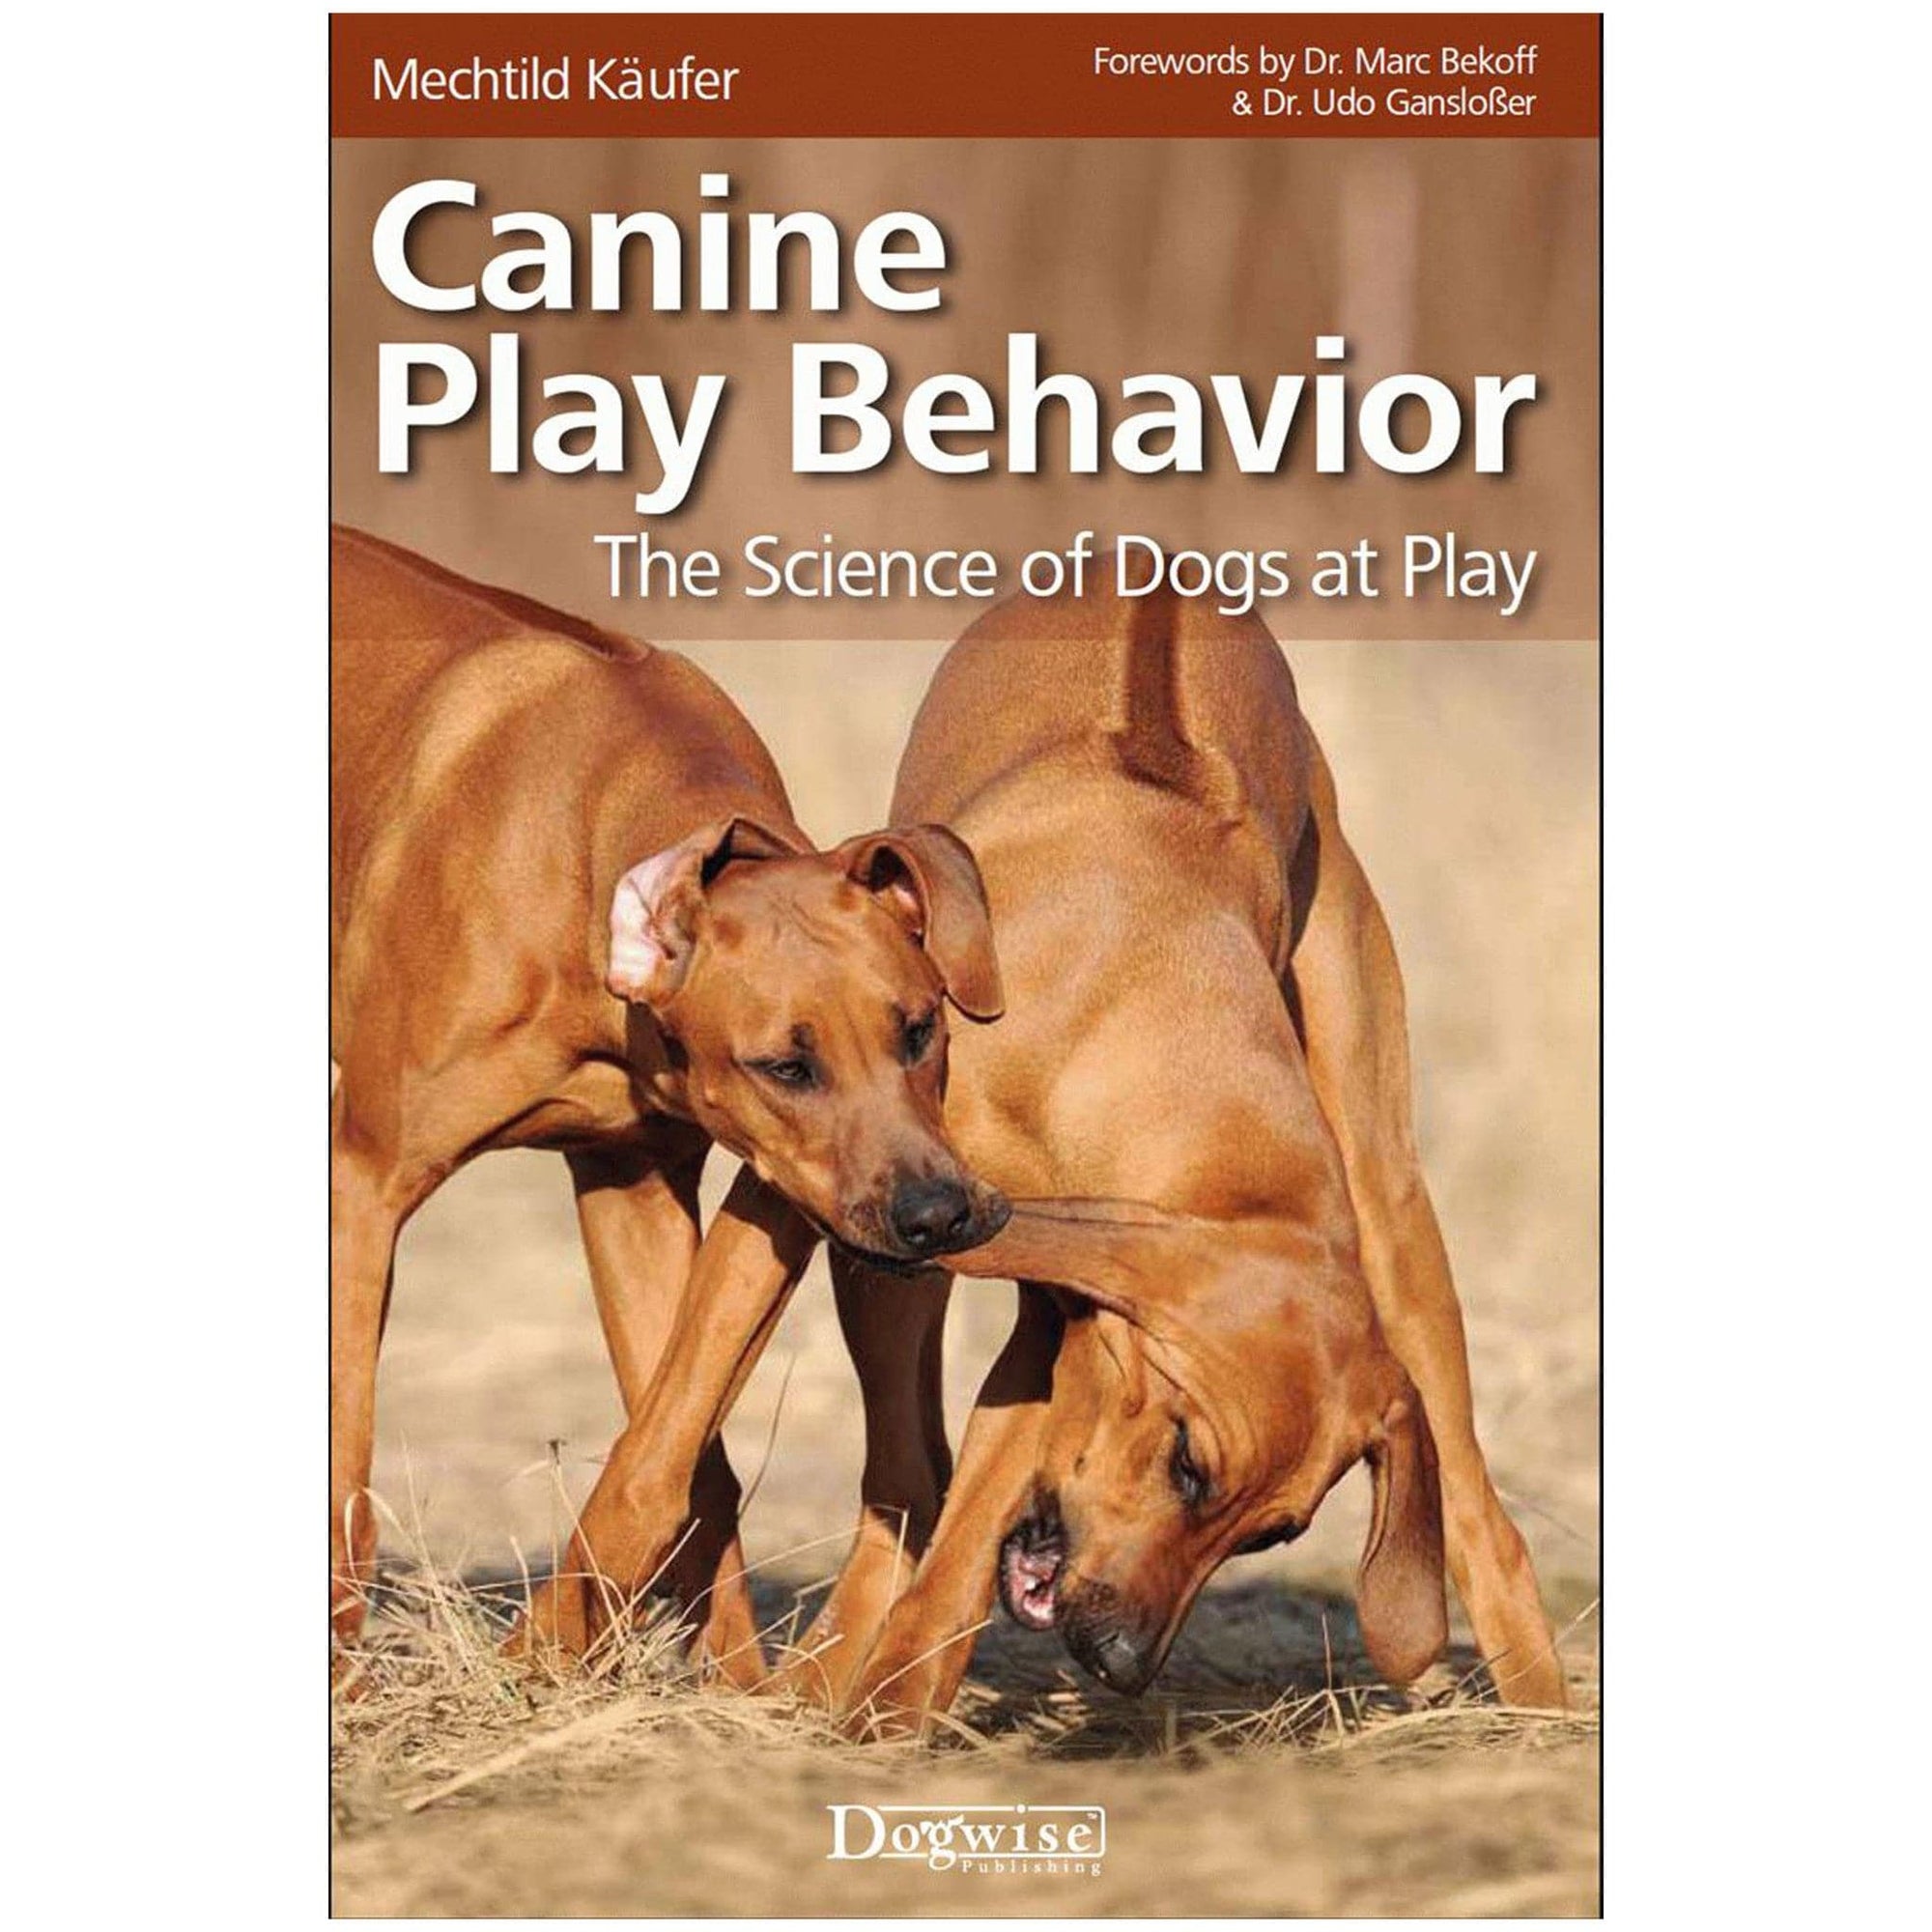 E-BOOK Canine Play Behavior: The Science of Dogs at Play by Mechtild Käufer